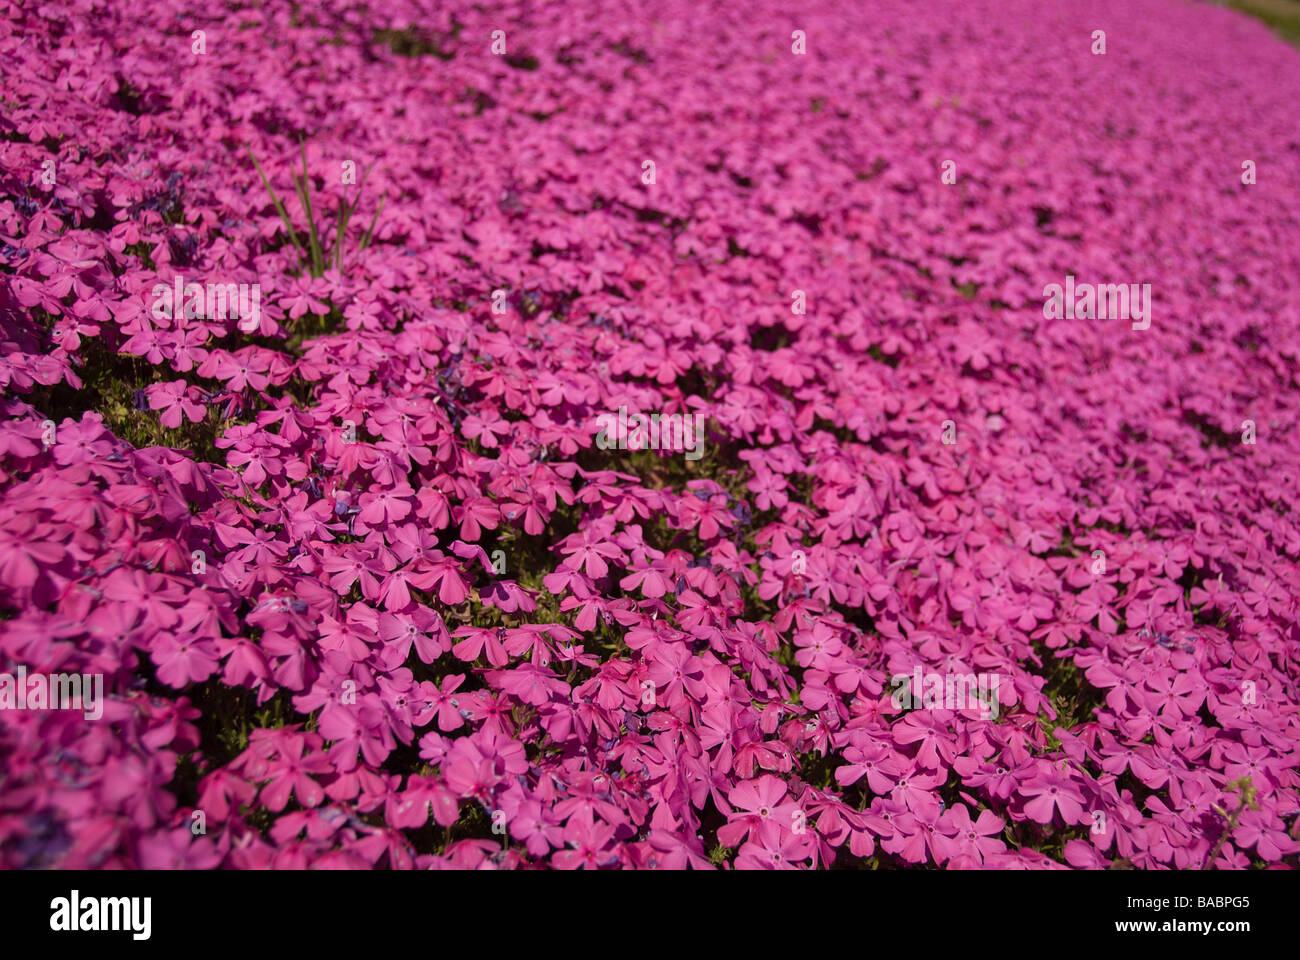 A mass planting of bright pink moss phlox Phlox subulata blooming in April in Japan s Kanto region Stock Photo